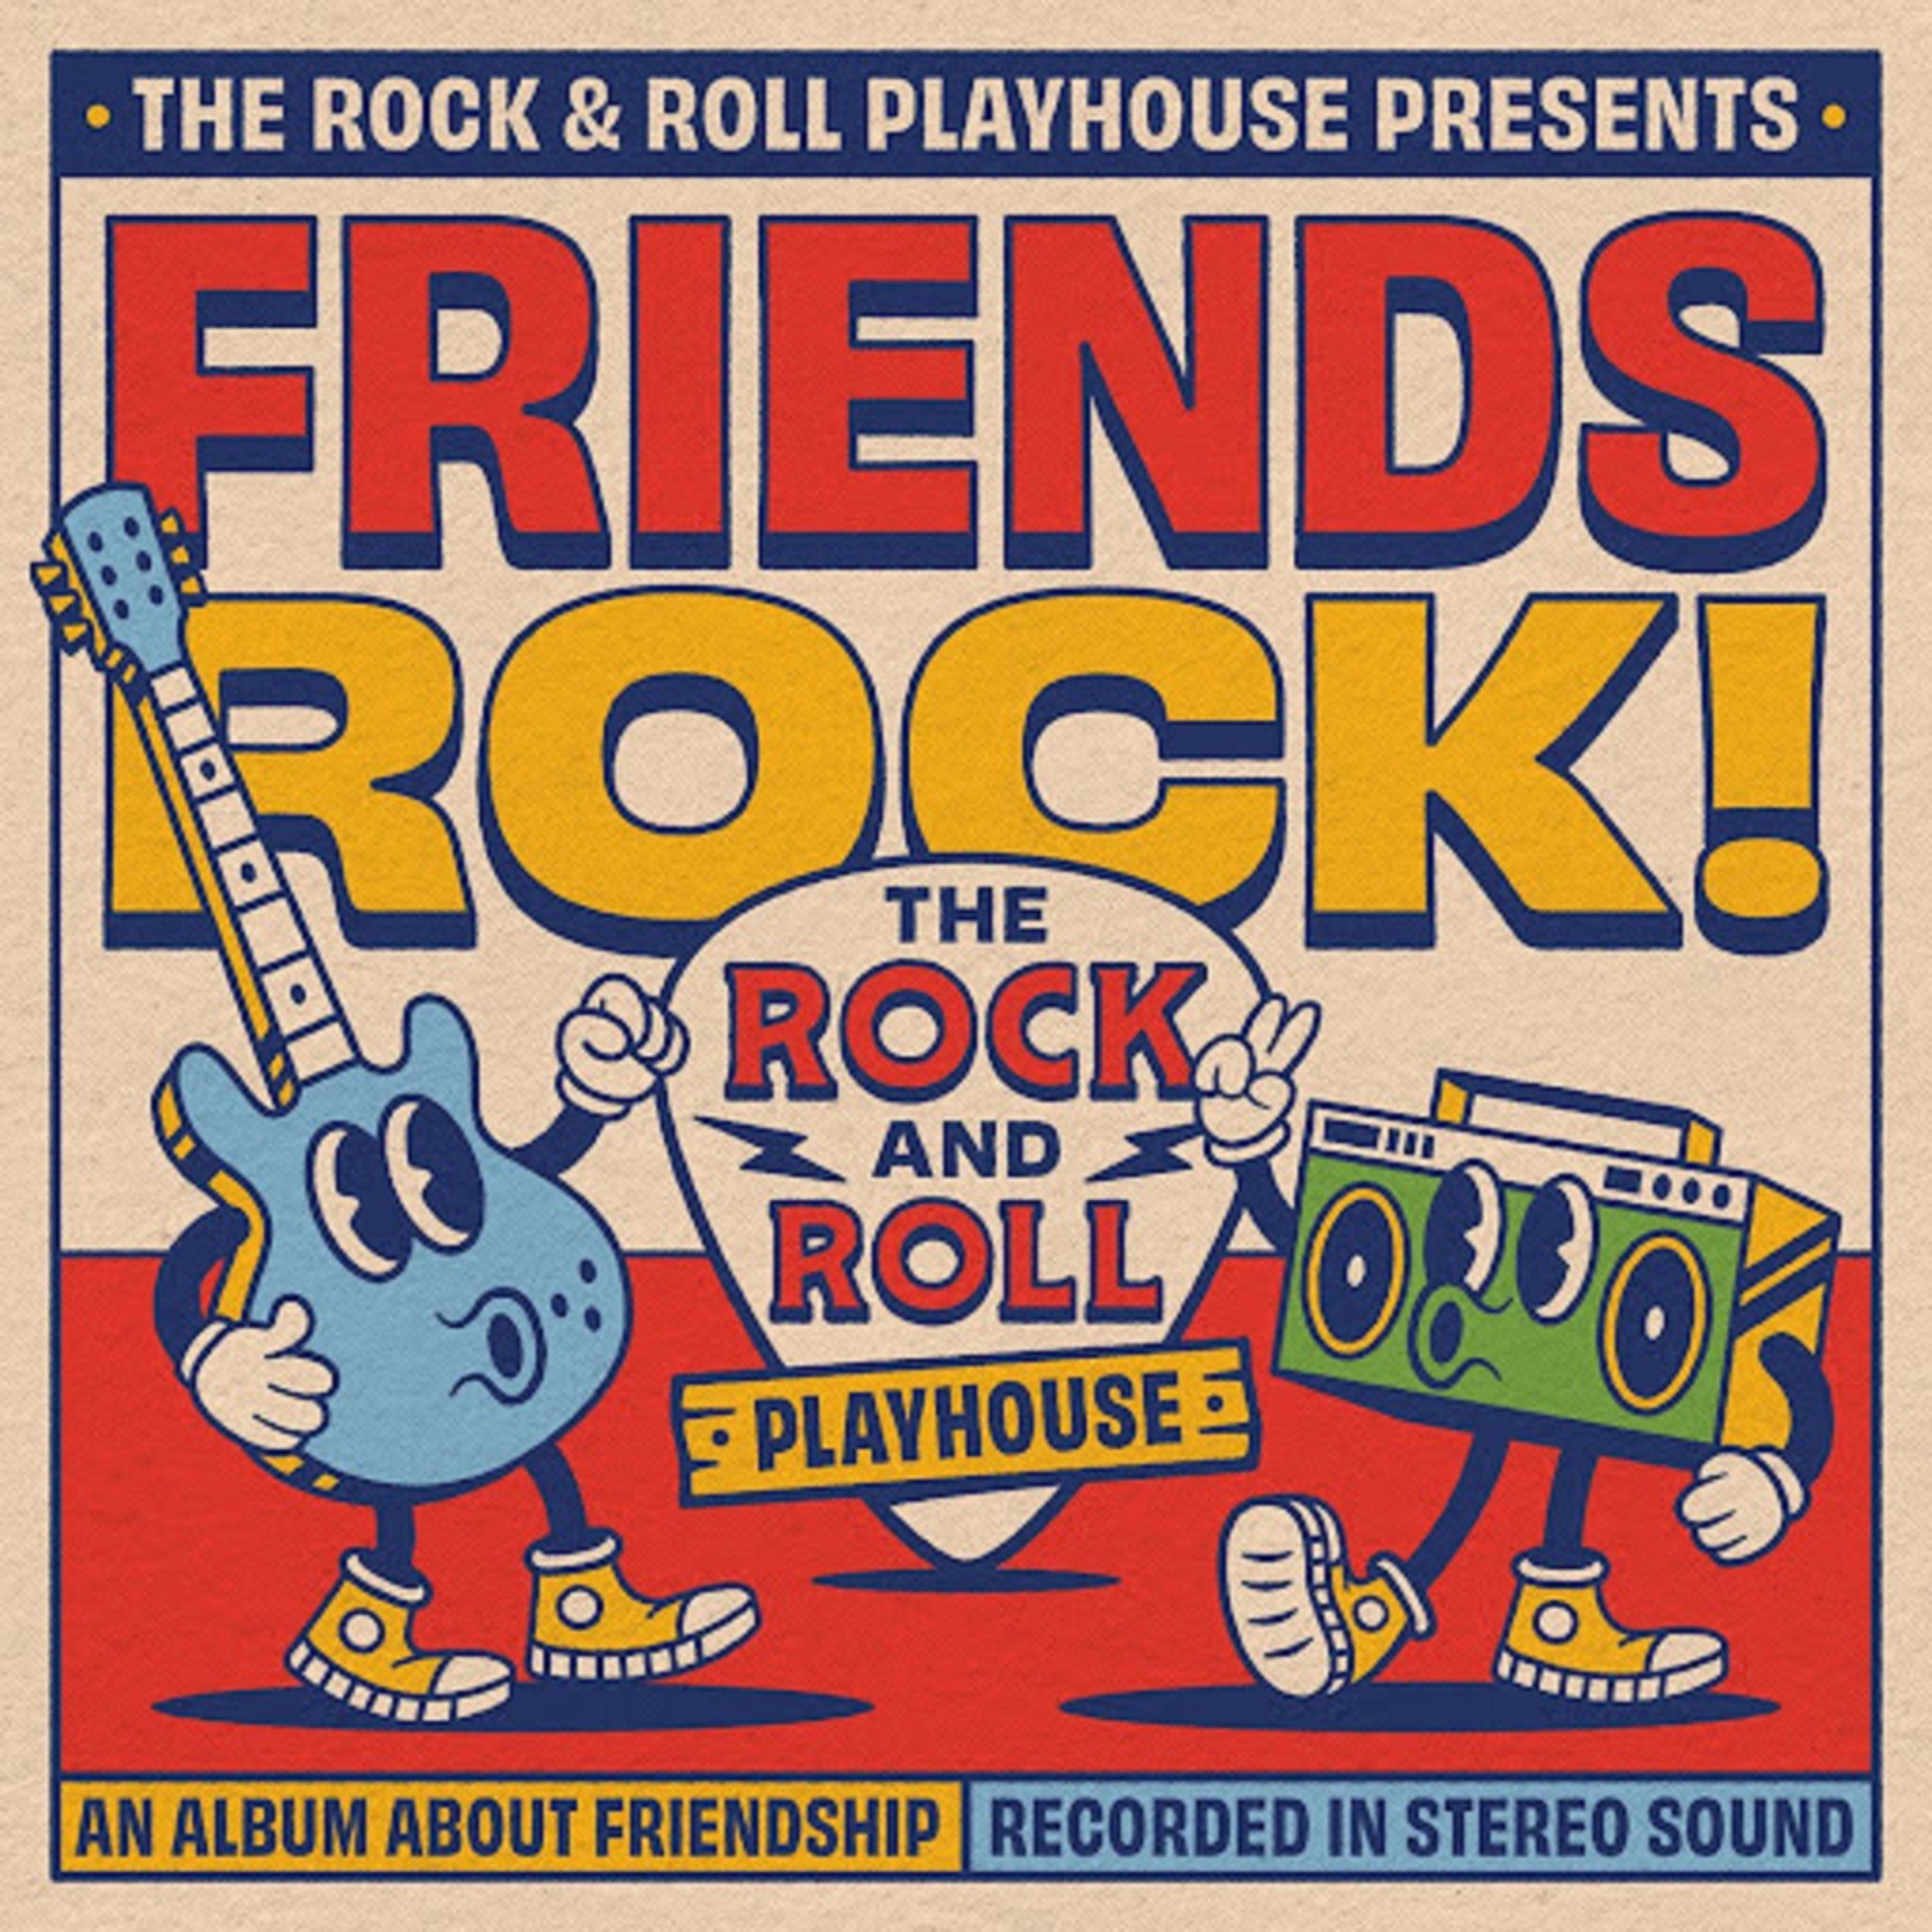 The Rock And Roll Playhouse Releases Debut Album "Friends Rock!"